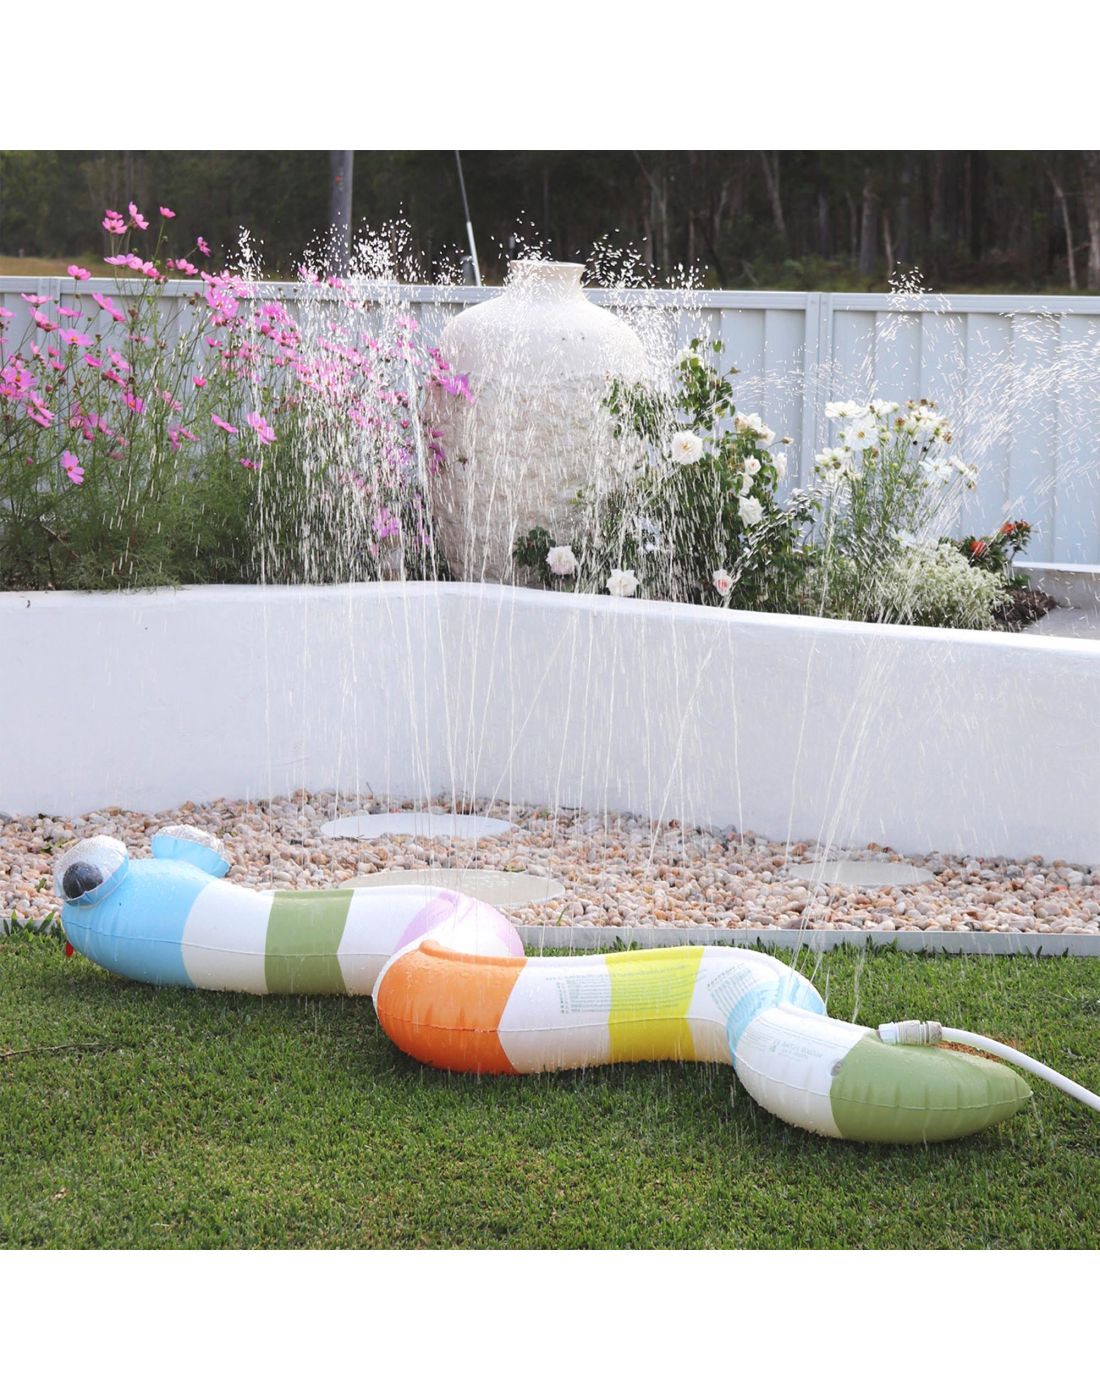 SunnyLife Inflatable Sprinkler Into the Wild Multi